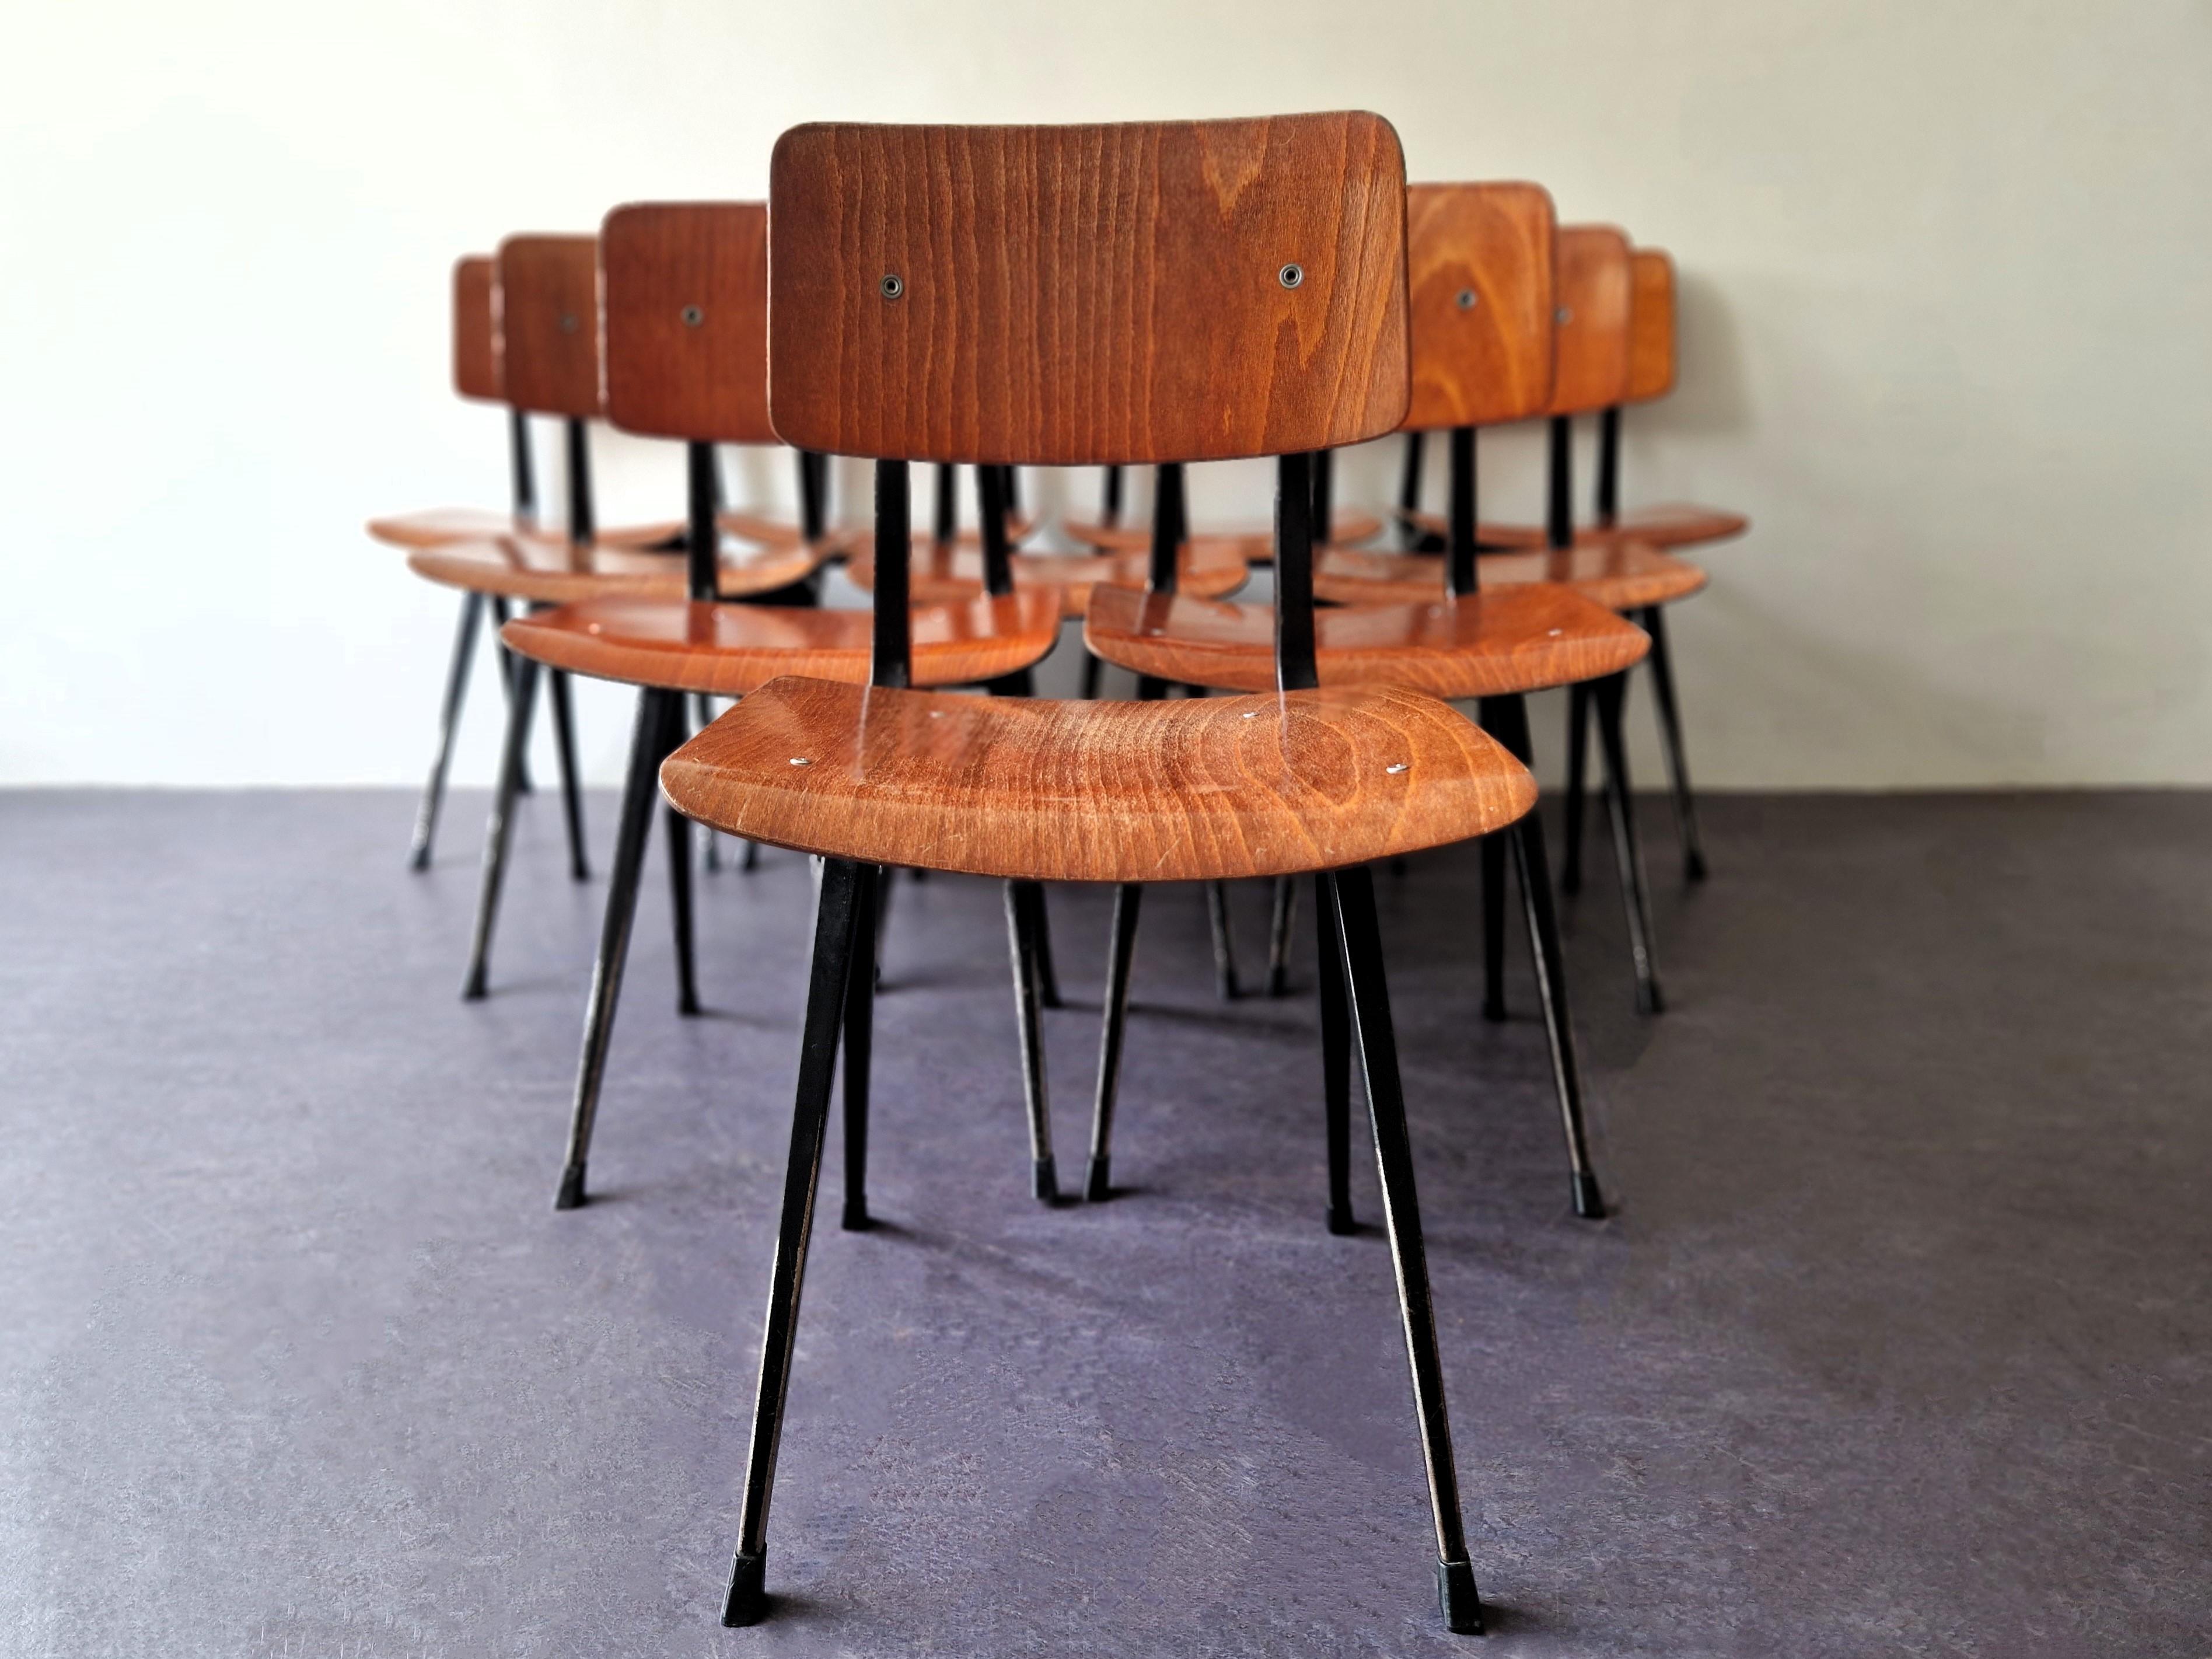 The famous 'Result' chair was designed by Friso Kramer for Ahrend de Cirkel in the 1950's. This model was very common to be seen in larger amounts at schools, canteens and office spaces. We have 10 of these chairs with a black frame available, they